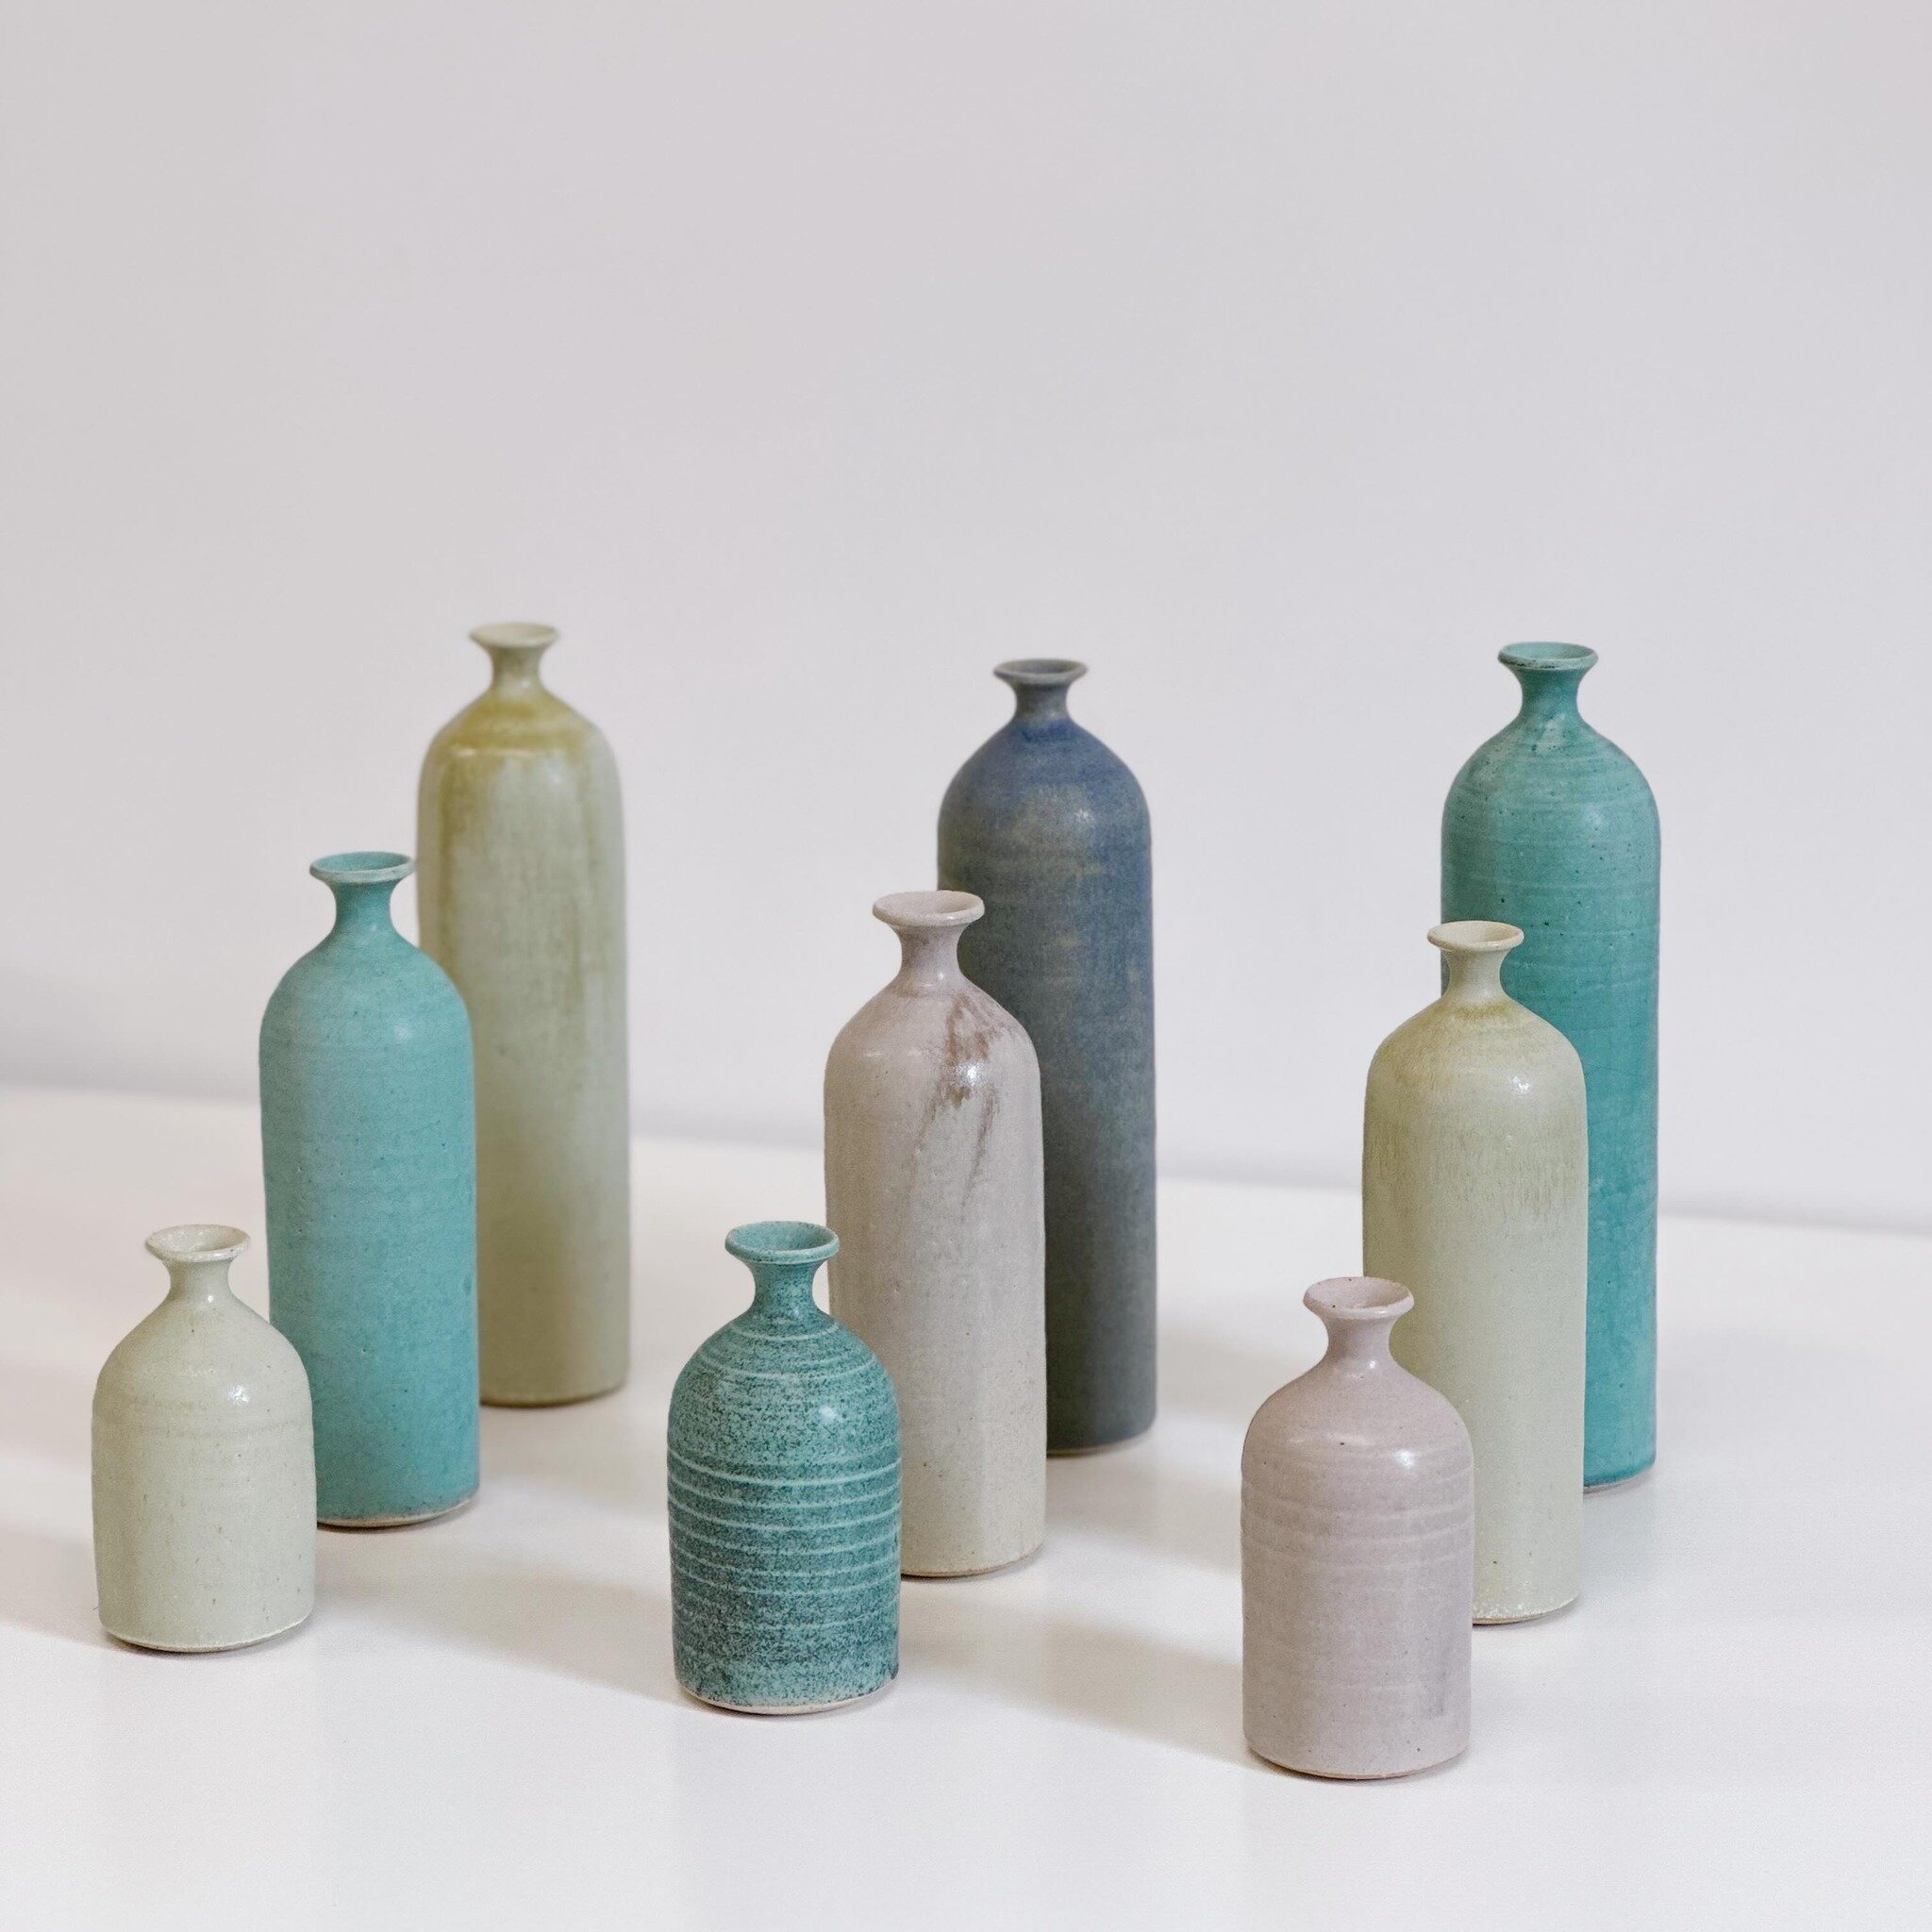 ~
York Ceramics Fair 
9th &amp; 10th March
York Racecourse

That&rsquo;s us packed and ready for the drive down to York. We&rsquo;re looking forward to being back at York Ceramics Fair over the weekend. Excited to be introducing some new glazed piece